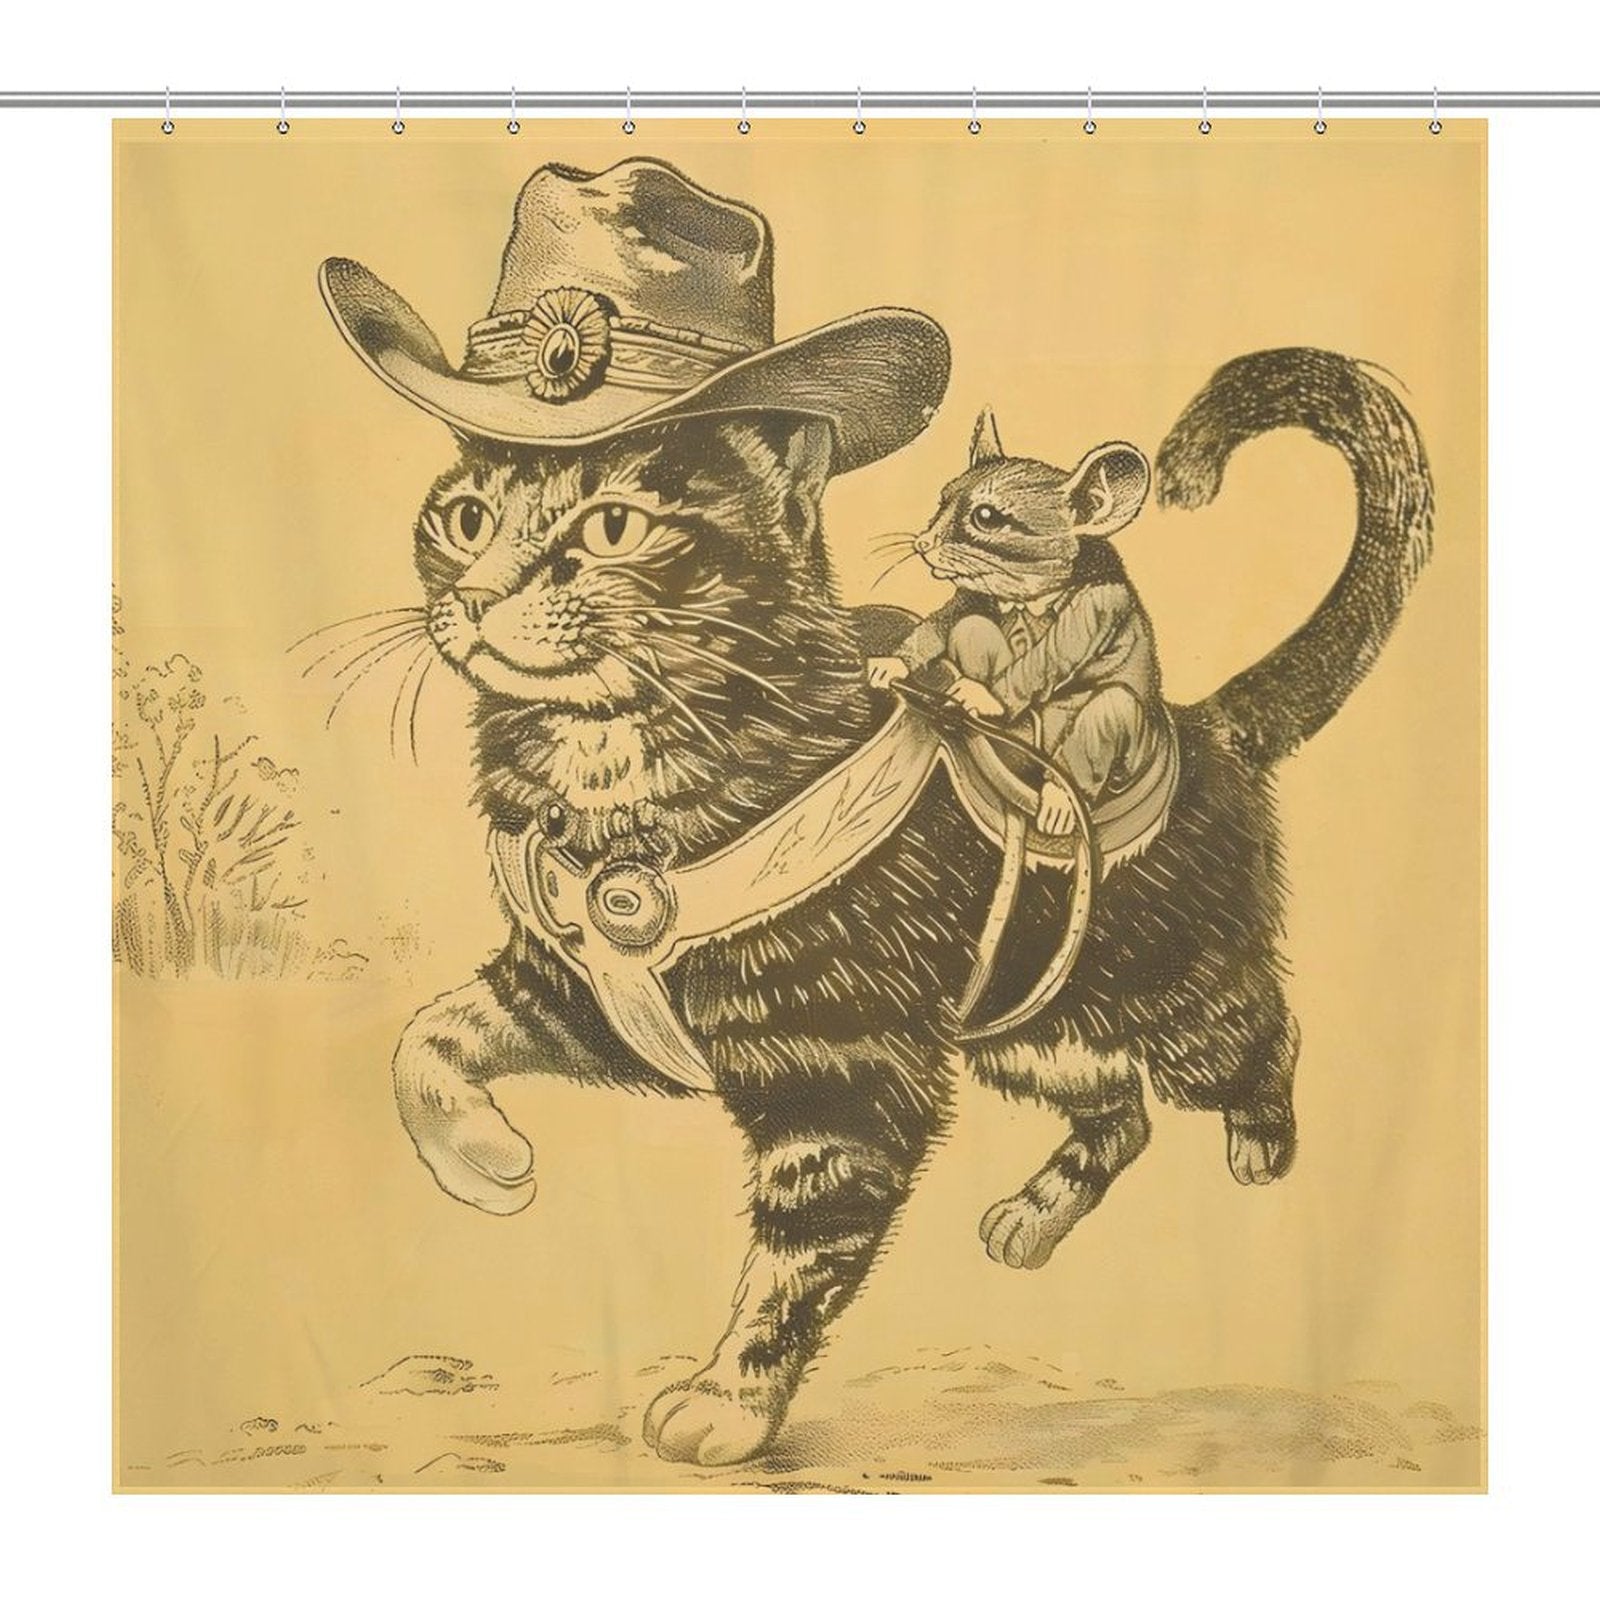 Liven up your bathroom decor with the Cotton Cat Funny Cool Mouse Riding Cat Shower Curtain featuring a vibrant illustration of a cat wearing a cowboy hat, with a mouse in cowboy attire riding on its back.